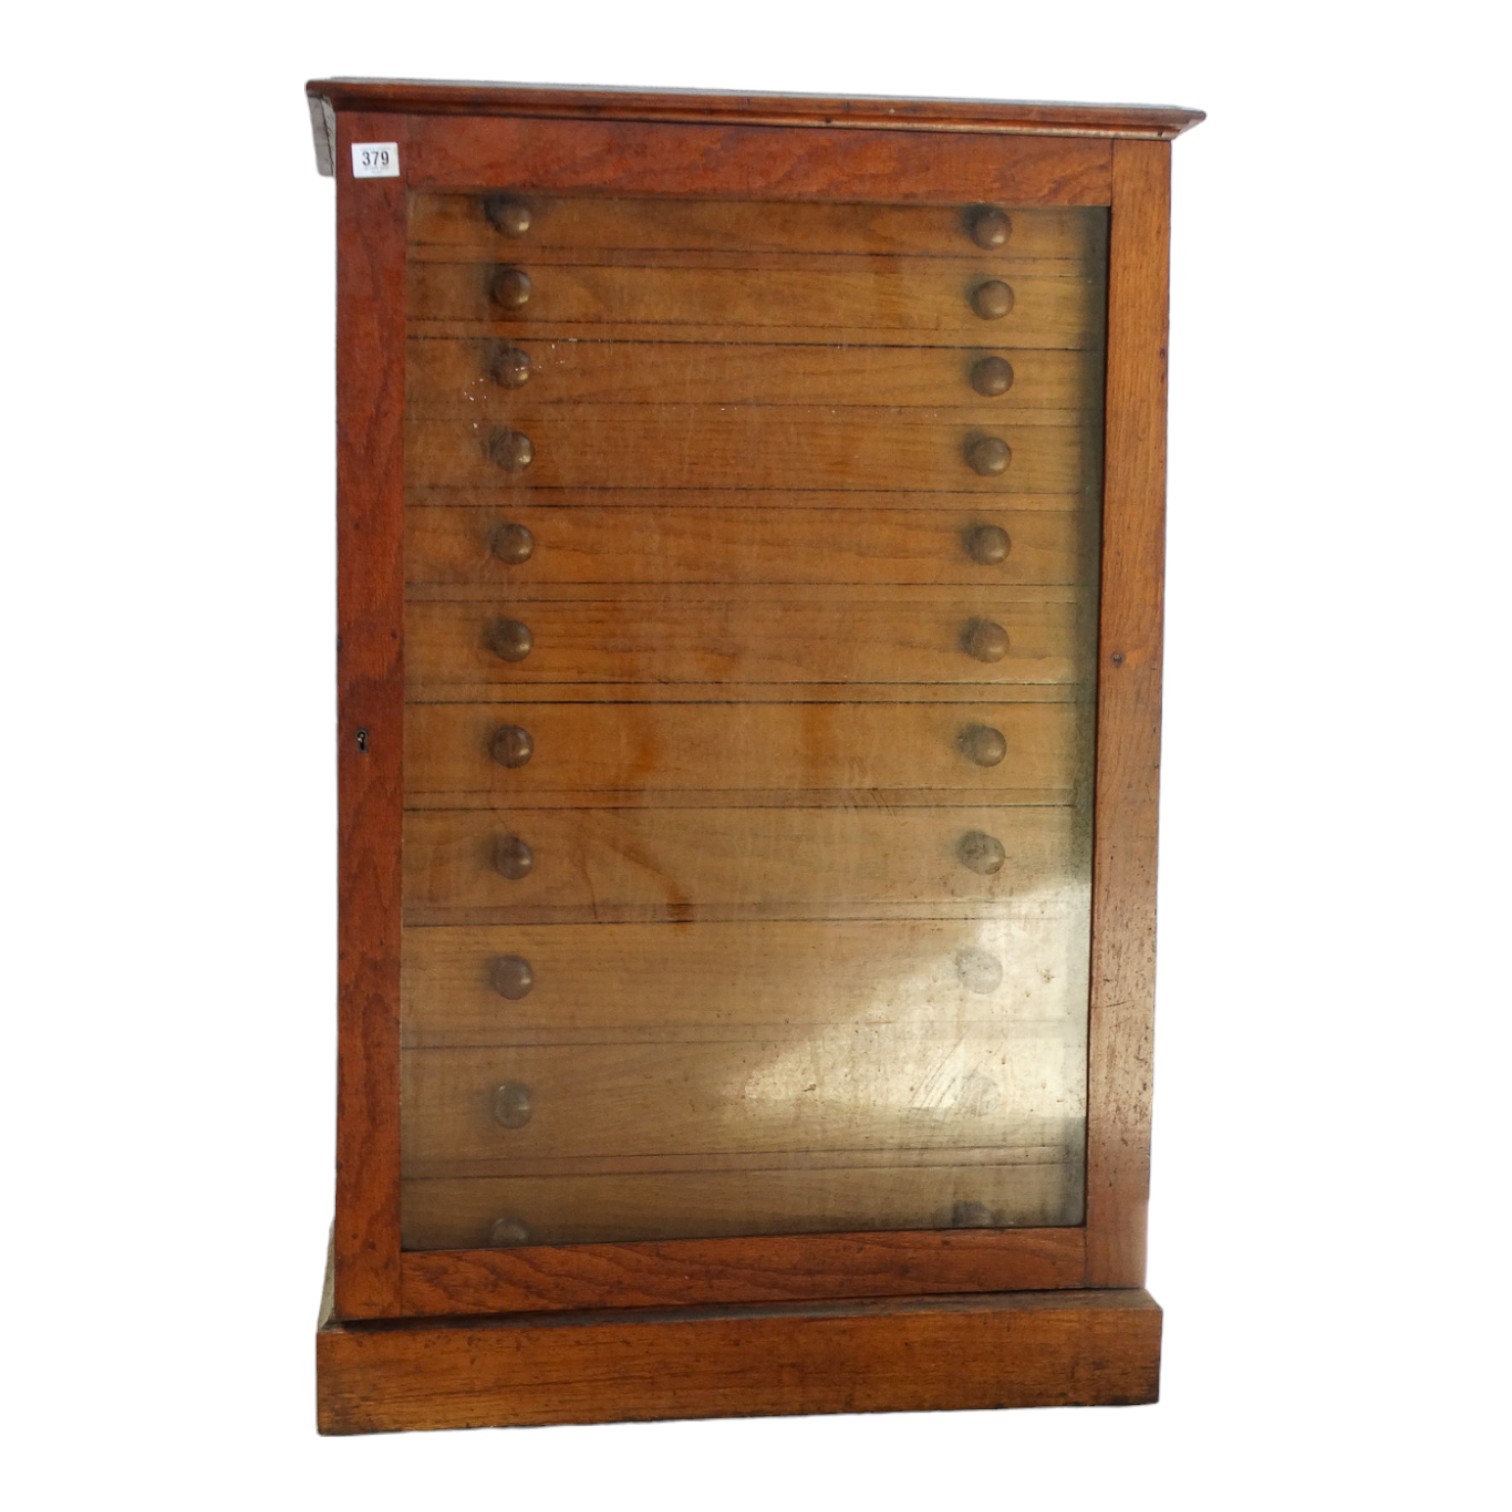 A late 19th century collectors cabinet - with a glazed pane door enclosing eleven drawers